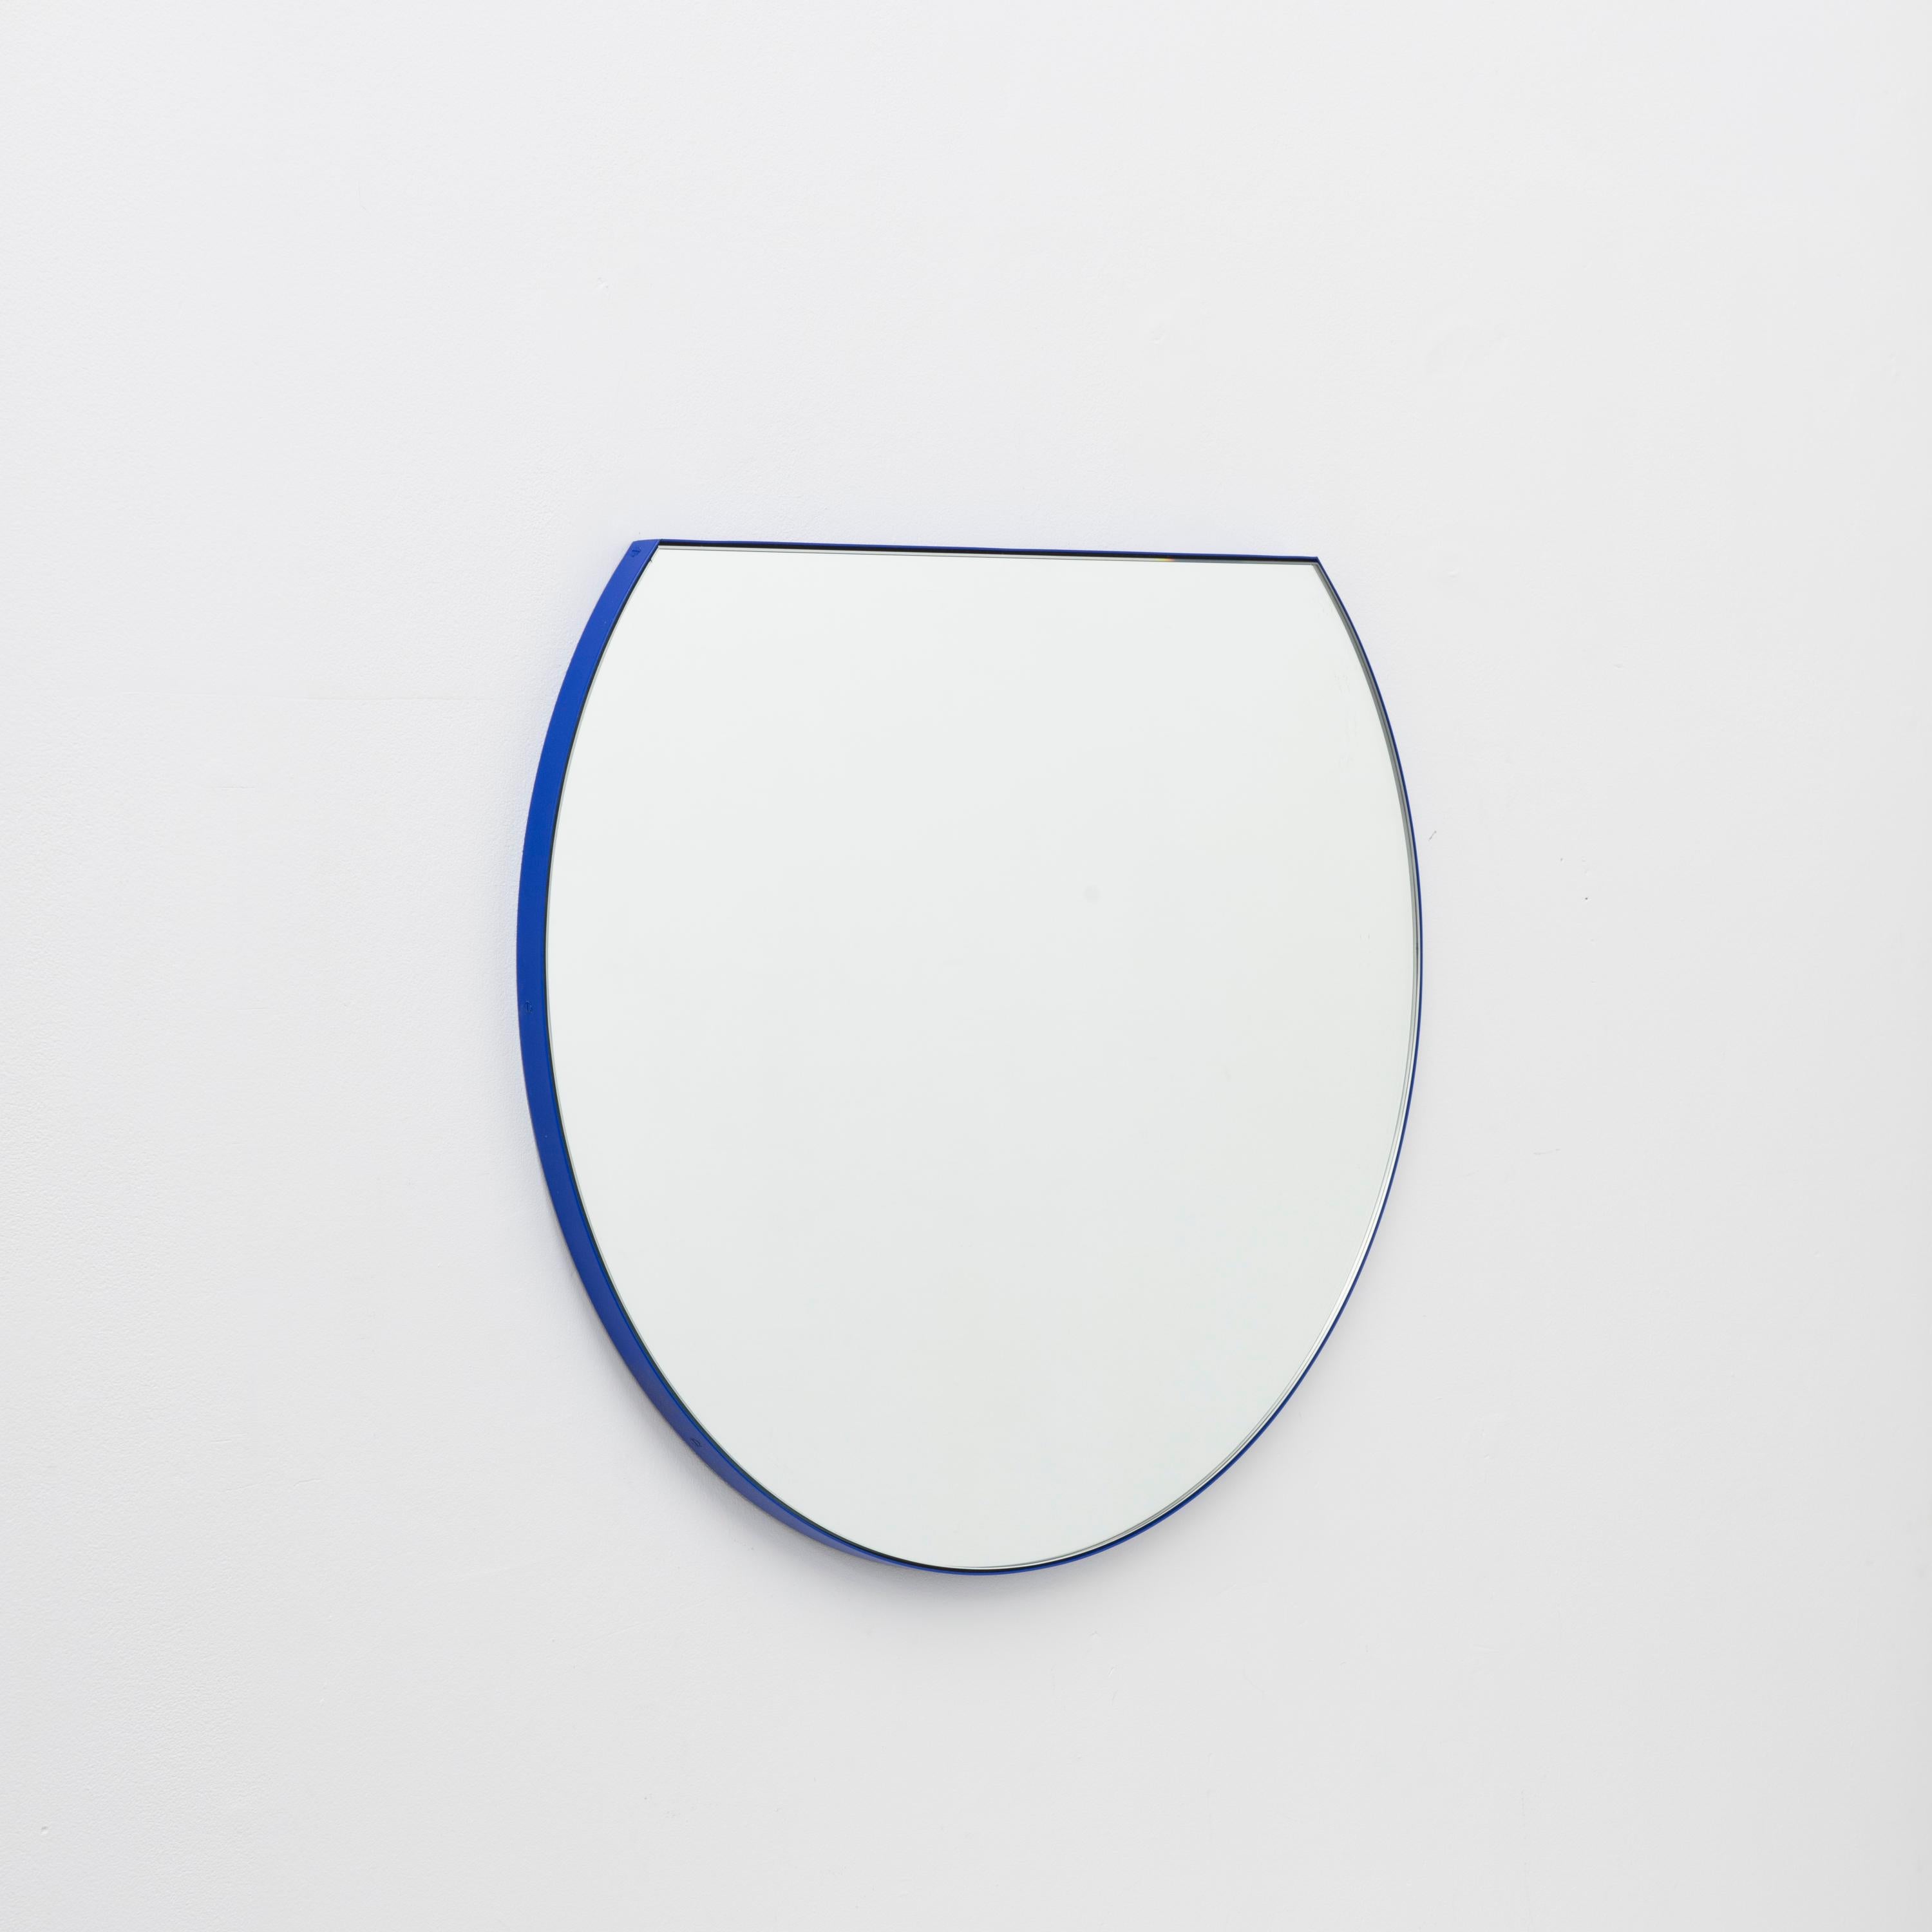 New modern round mirror with a vibrant powder coated aluminium blue frame. Designed and handcrafted in London, UK.

Fitted with a brass hook or an aluminium z-bar depending on the size of the mirror. Also available on demand with a split batten